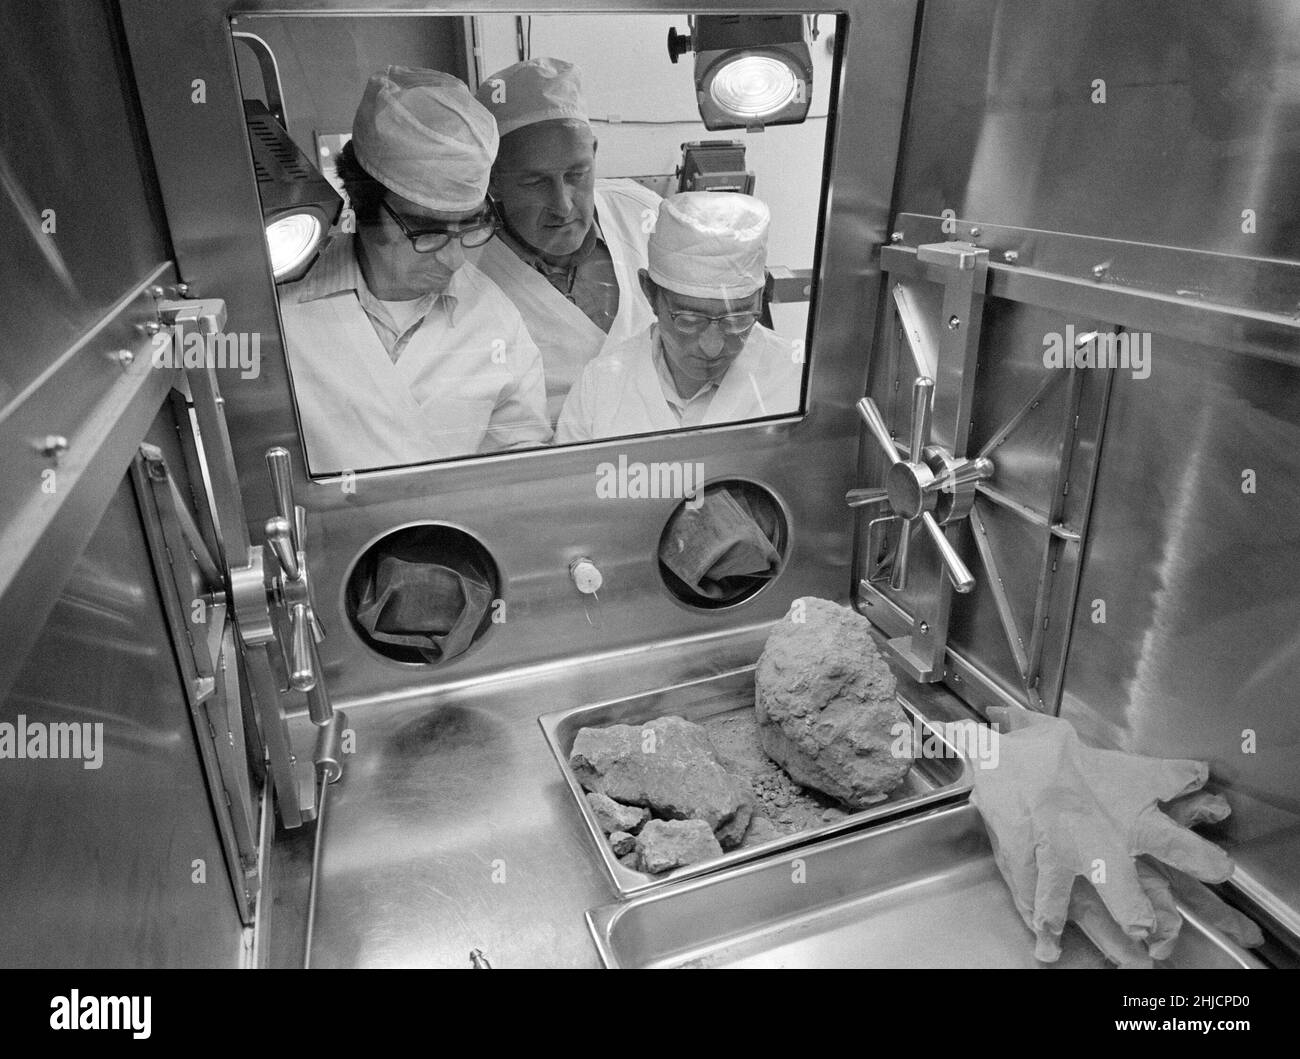 In the Lunar Receiving Laboratory at NASA‚Äôs Manned Spacecraft Center, geologists Don Morrison (left) and Fred Horz flank University of Texas geologist/professor William (Bill) Muehlberger as the three look at a rock brought back from the moon by Apollo 16 astronauts. Lunar sample 61016, better known as ‚ÄòBig Muley‚Äô, is a large breccia sample, the largest moon rock returned by any Apollo crew, which was named after Muehlberger, the Apollo 16 field geology team leader. May 19, 1972. Stock Photo